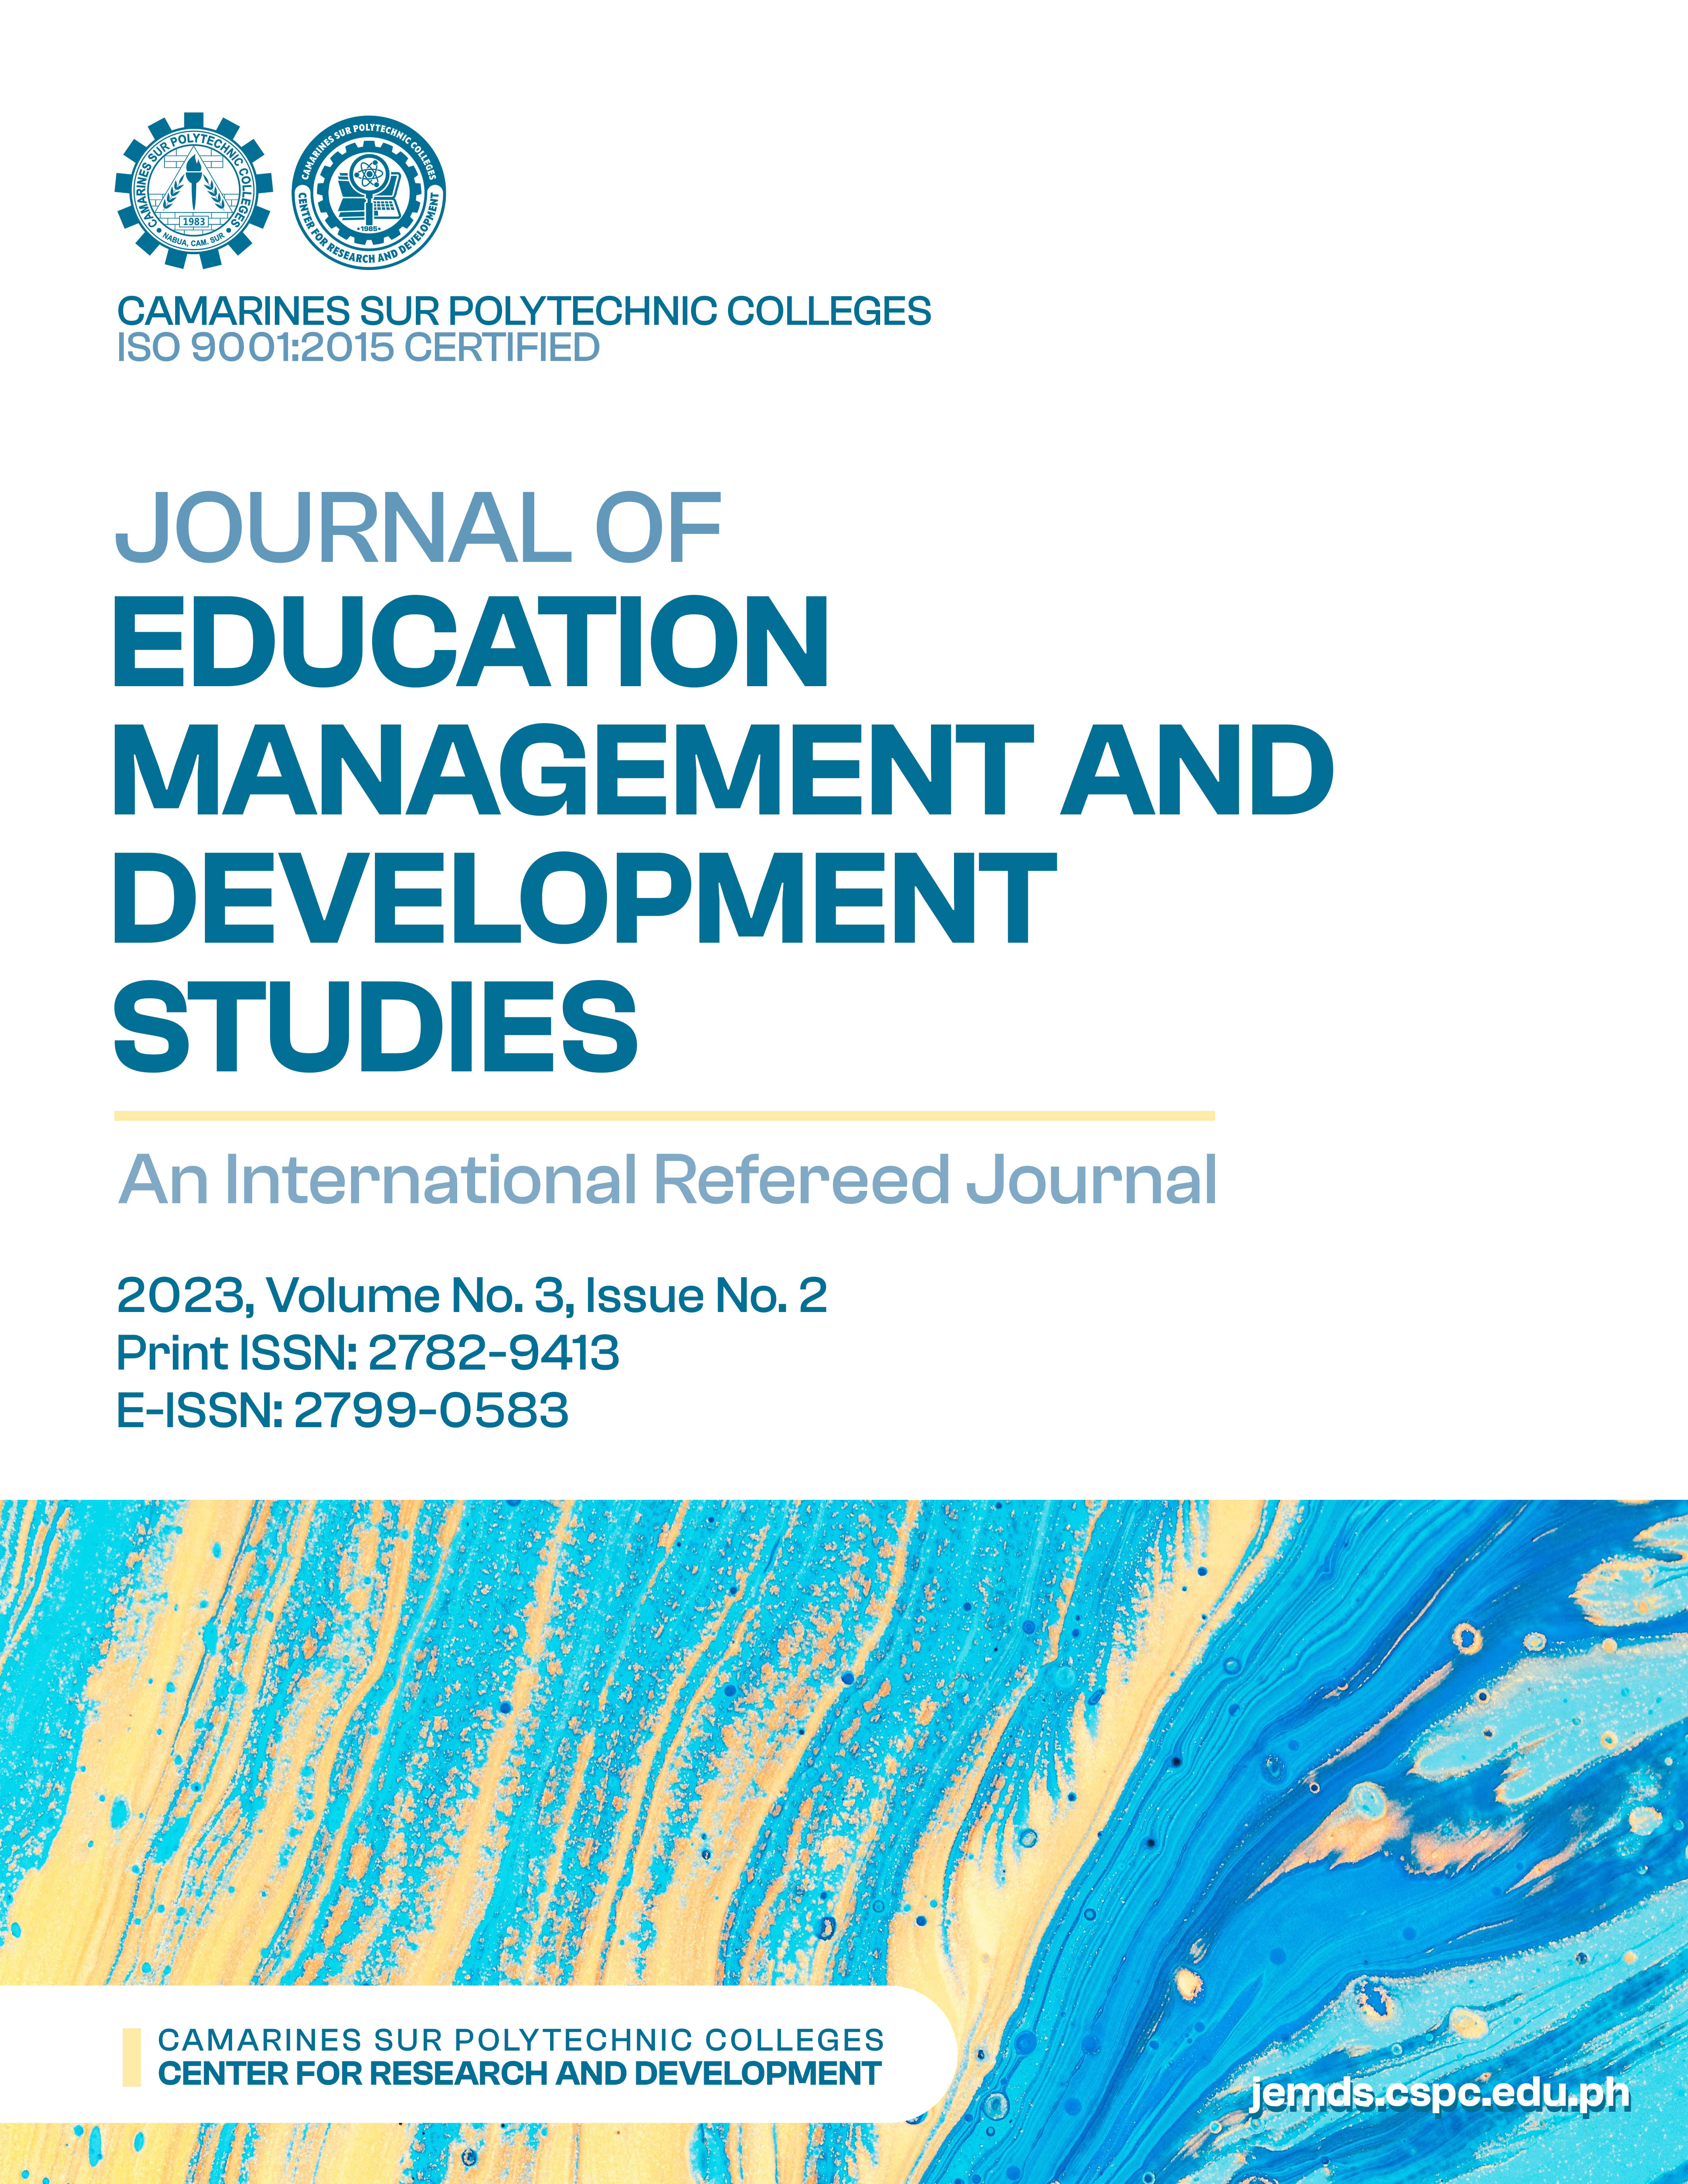 Journal of Education, Management and Development Studies